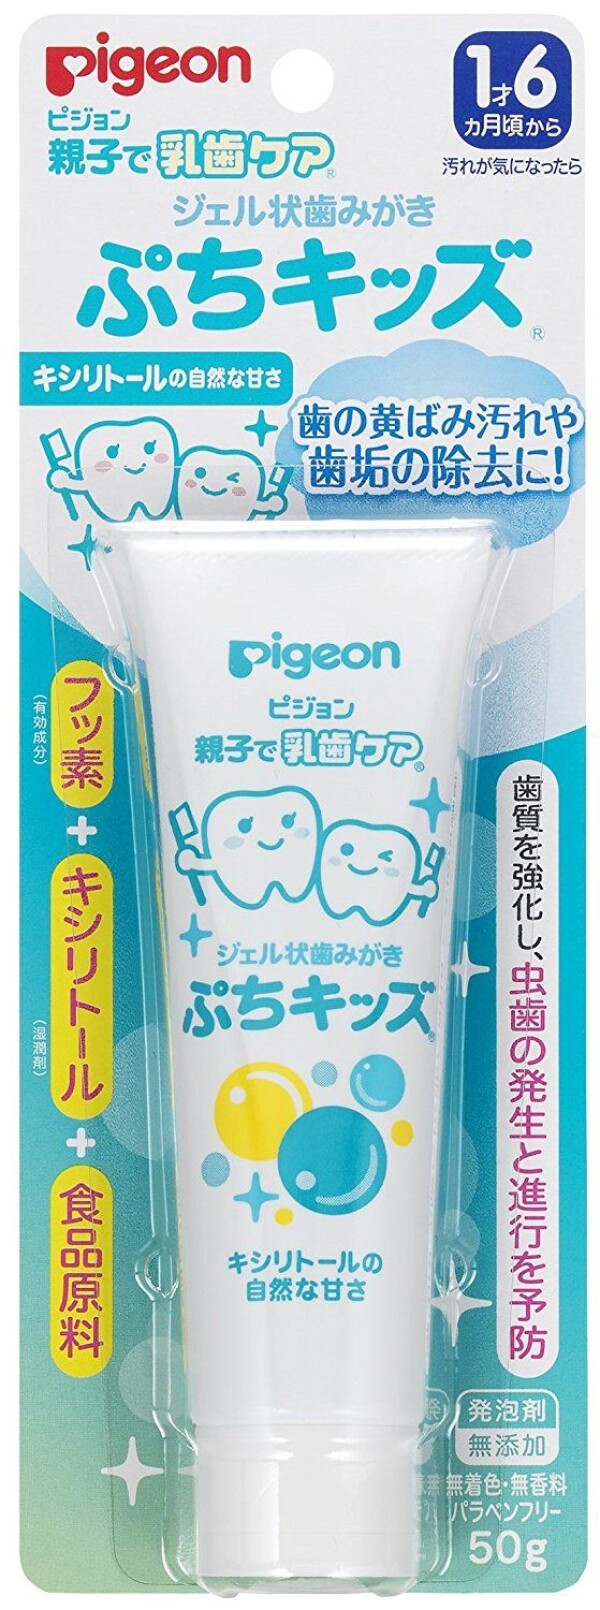 Pigeon Gel for Milk Teeth with Xylitol